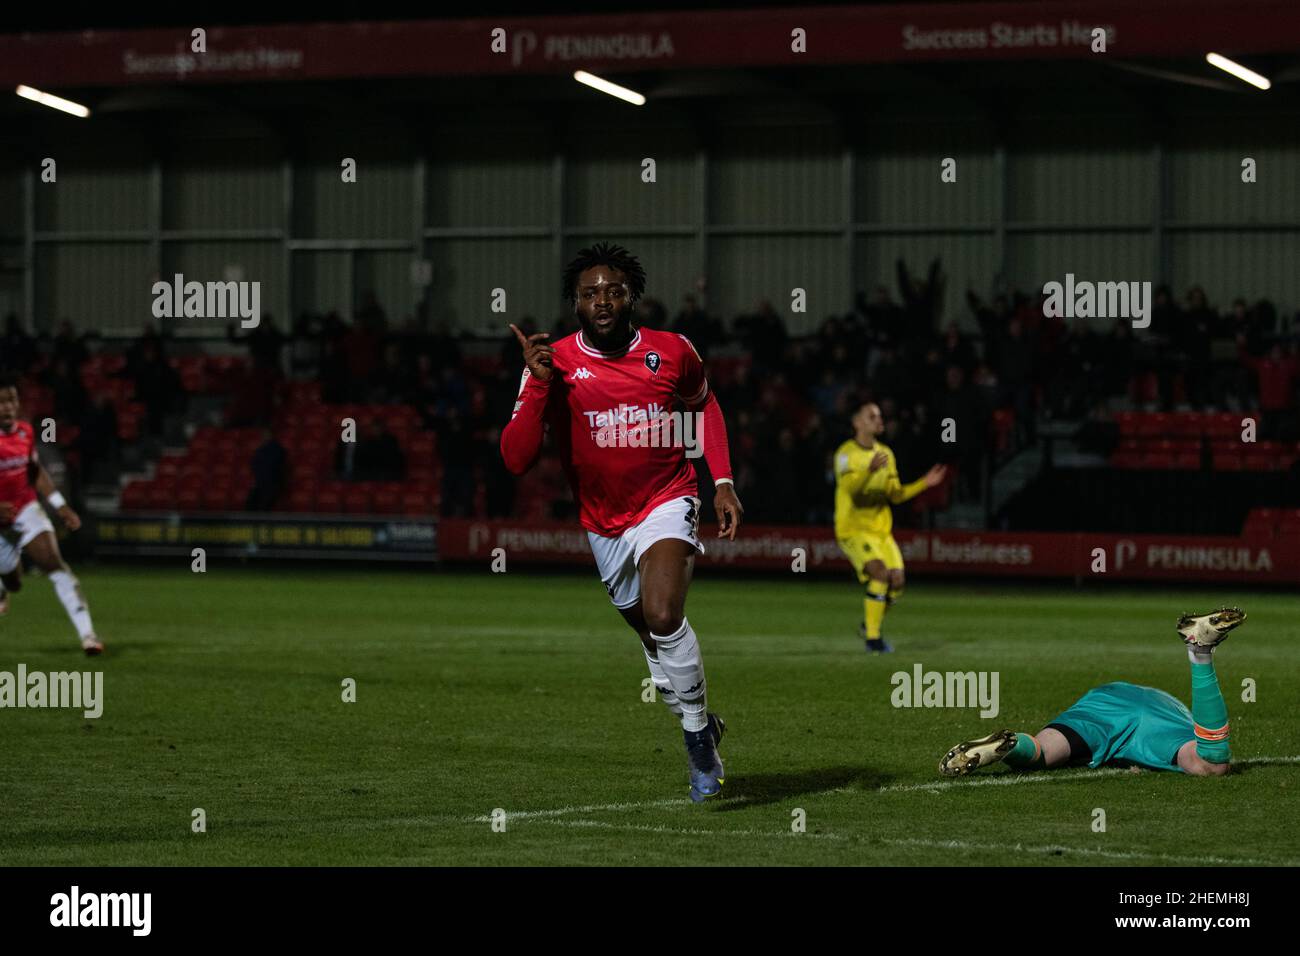 Salford, UK. 11th Jan 2022. Aramide Oteh scores the opening goal for Salford, after an error from Tranmere goalkeeper Joel Torrence, as the hosts lead 1-0 at half time. Stock Photo